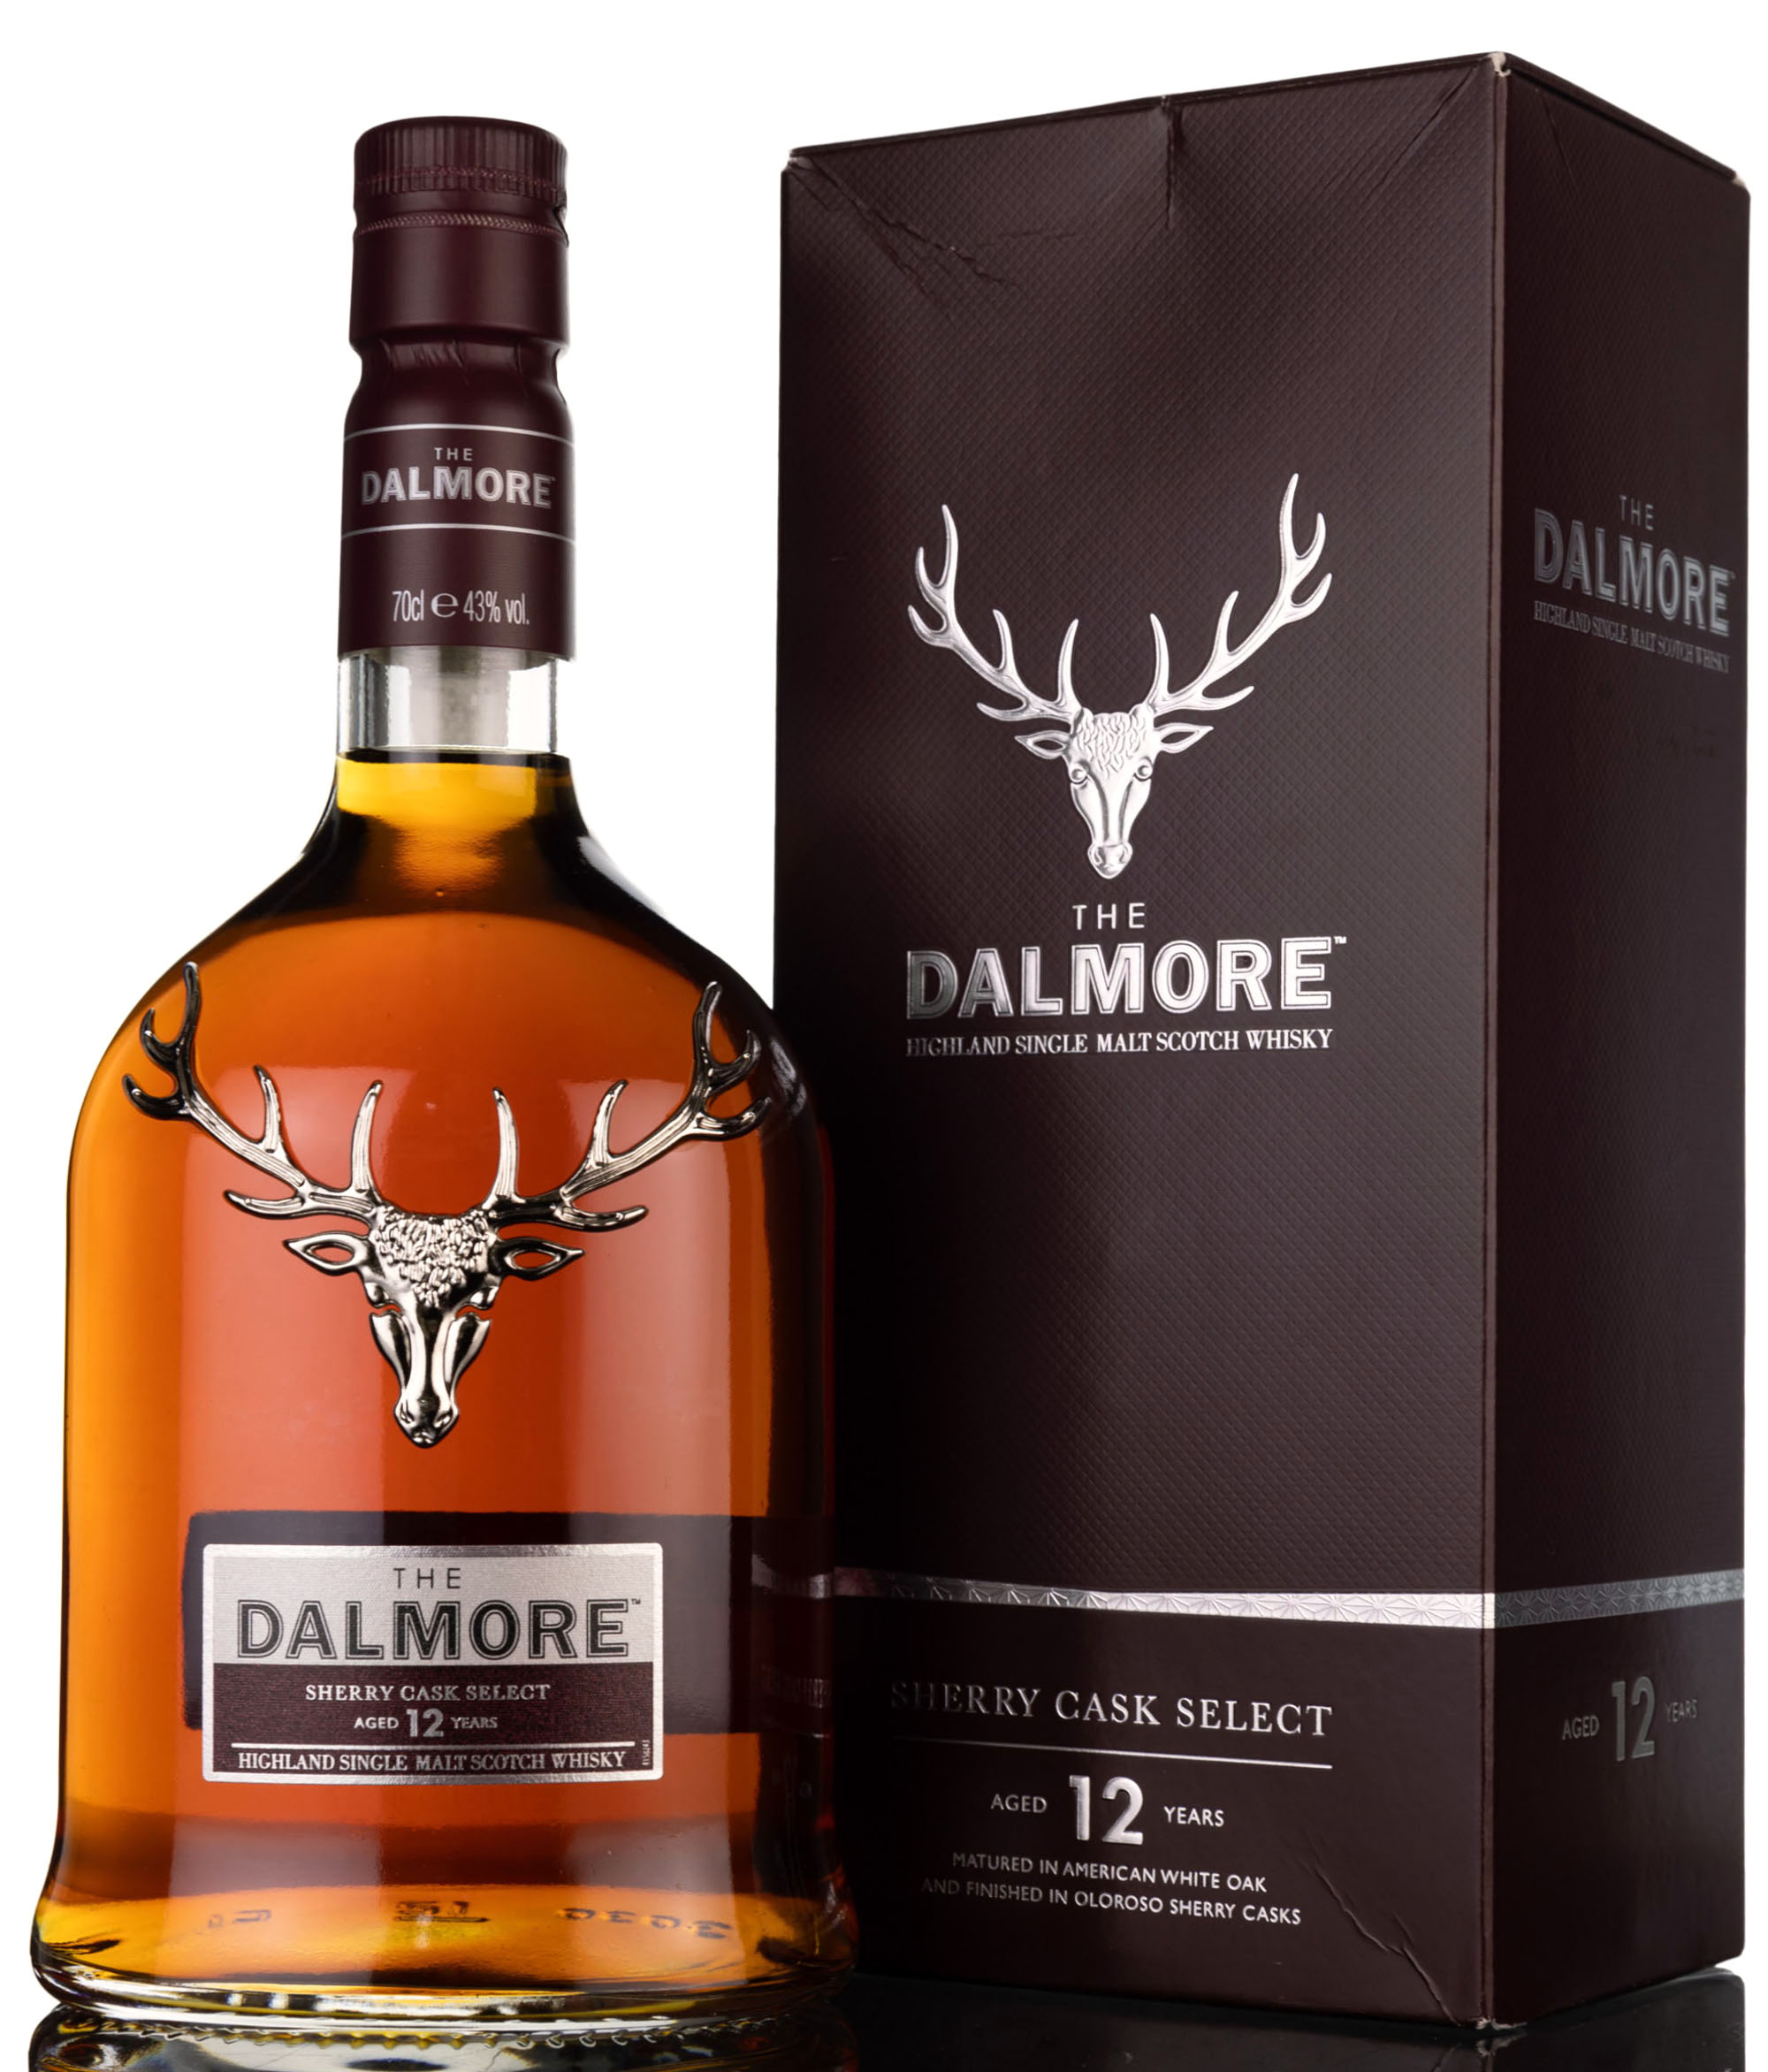 Dalmore 12 Year Old - Sherry Cask Select - 2021 Release